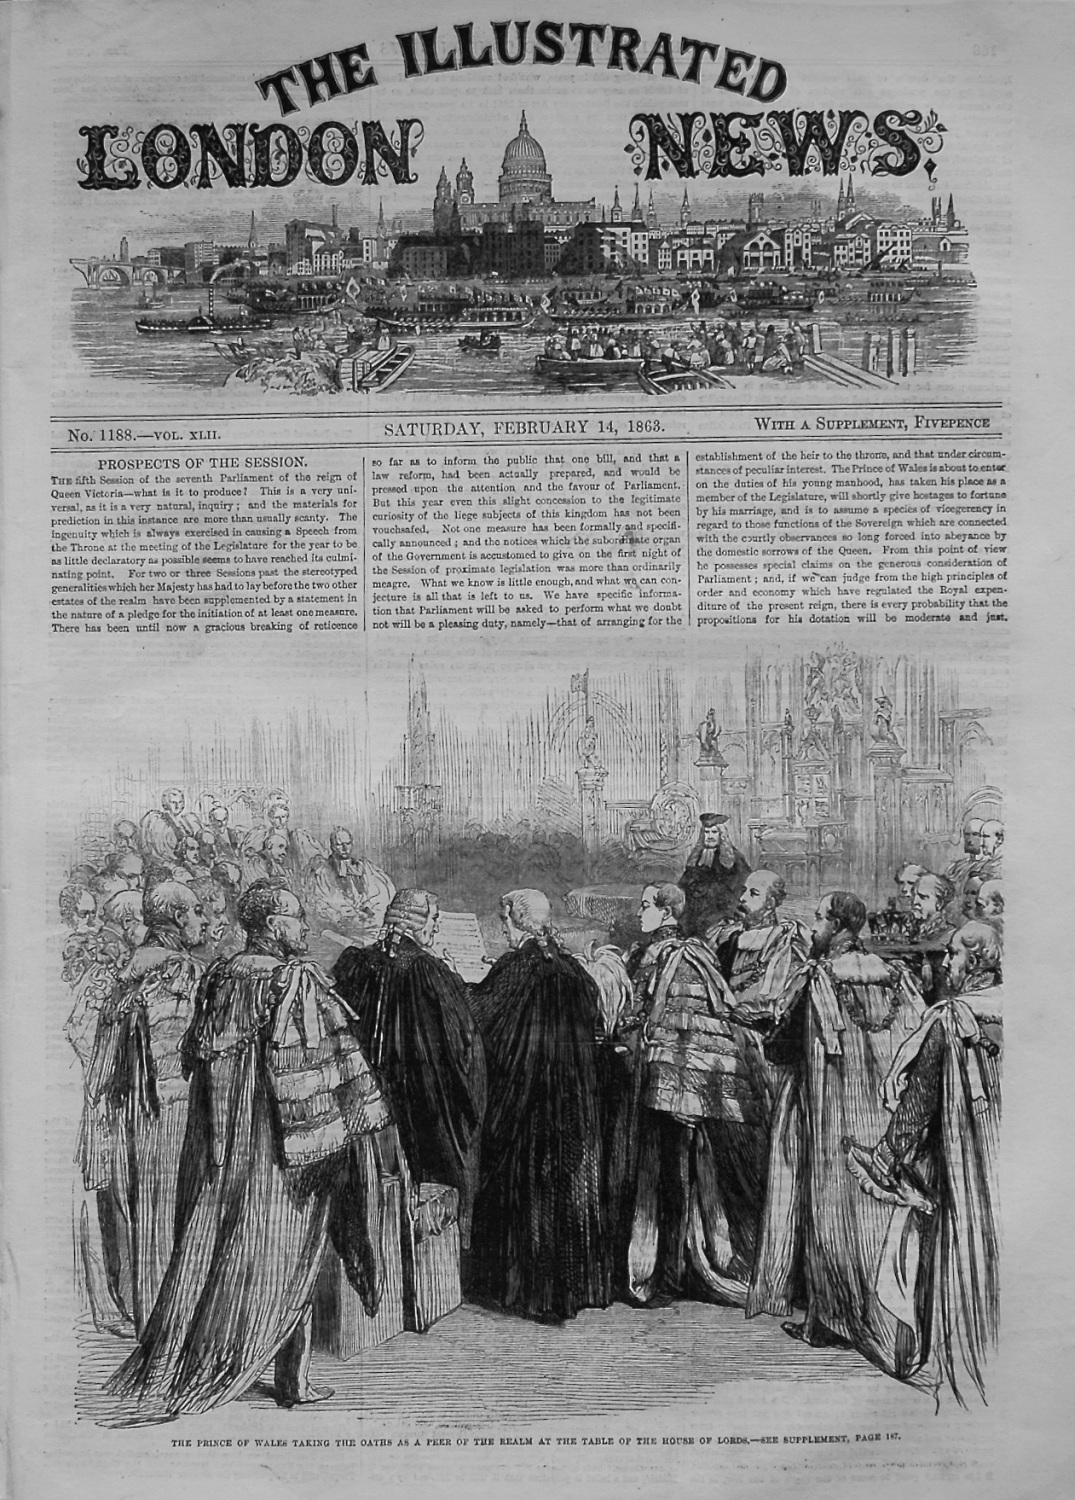 Illustrated London News. February 14th, 1863.